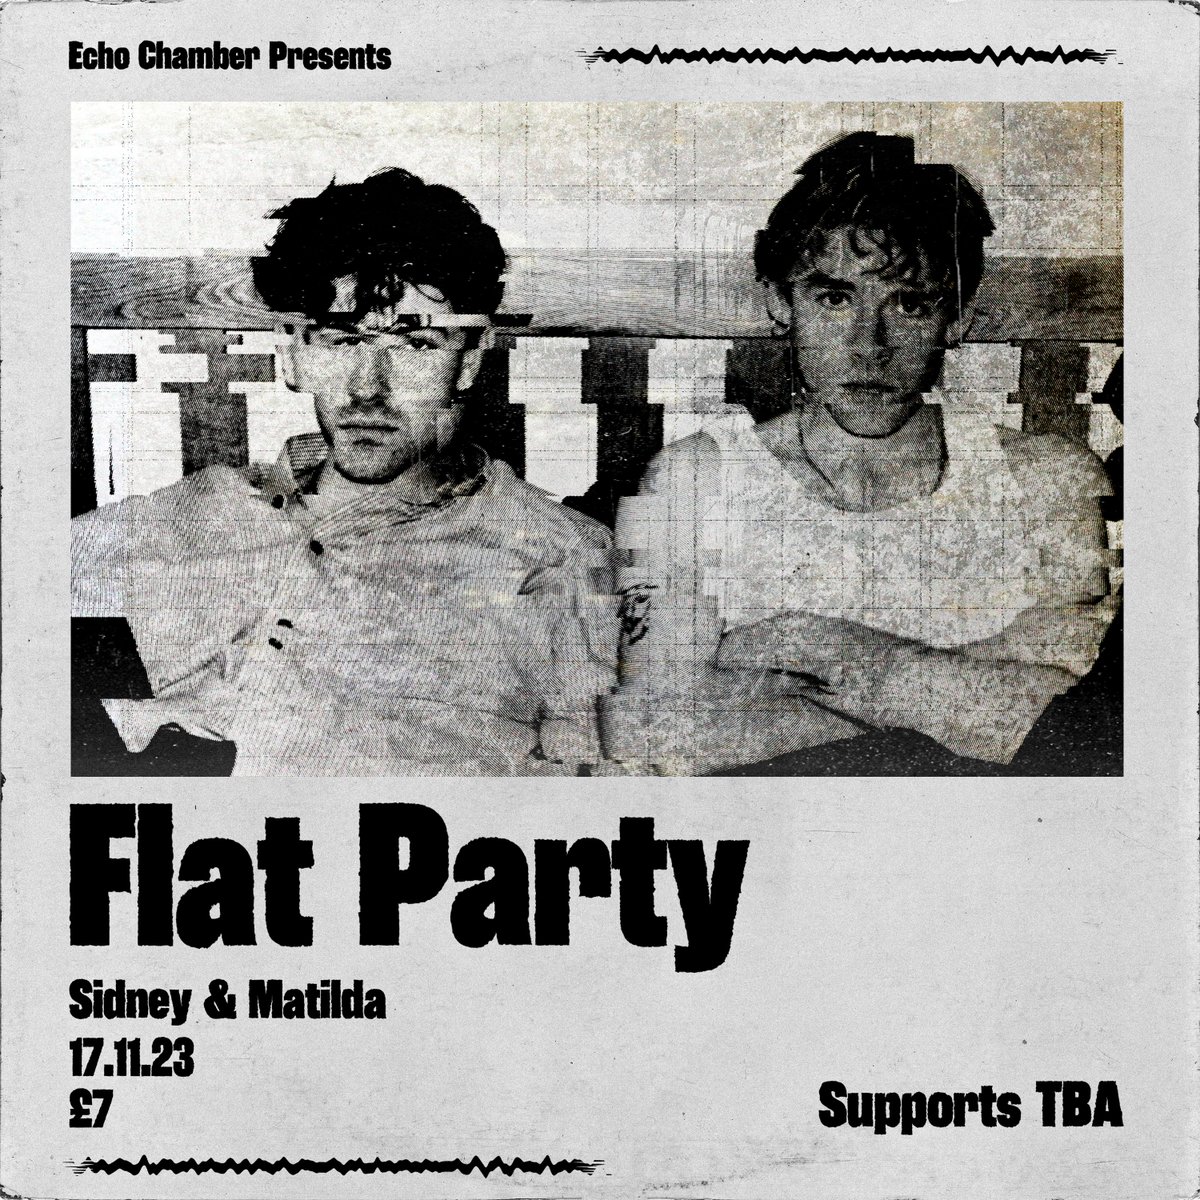 🚨GIG ANNOUNCEMENT🚨 We have Flat Party coming down on the 17th September, in a gig organised by Echo Chamber ! Tickets £7 and they are already on sale now! #sidneyandmatilda #Sheffield #SheffieldIsSuper #WhatsOnSheffield #SheffieldEvents #LiveMusicSheffield #AllWelcomeAlways